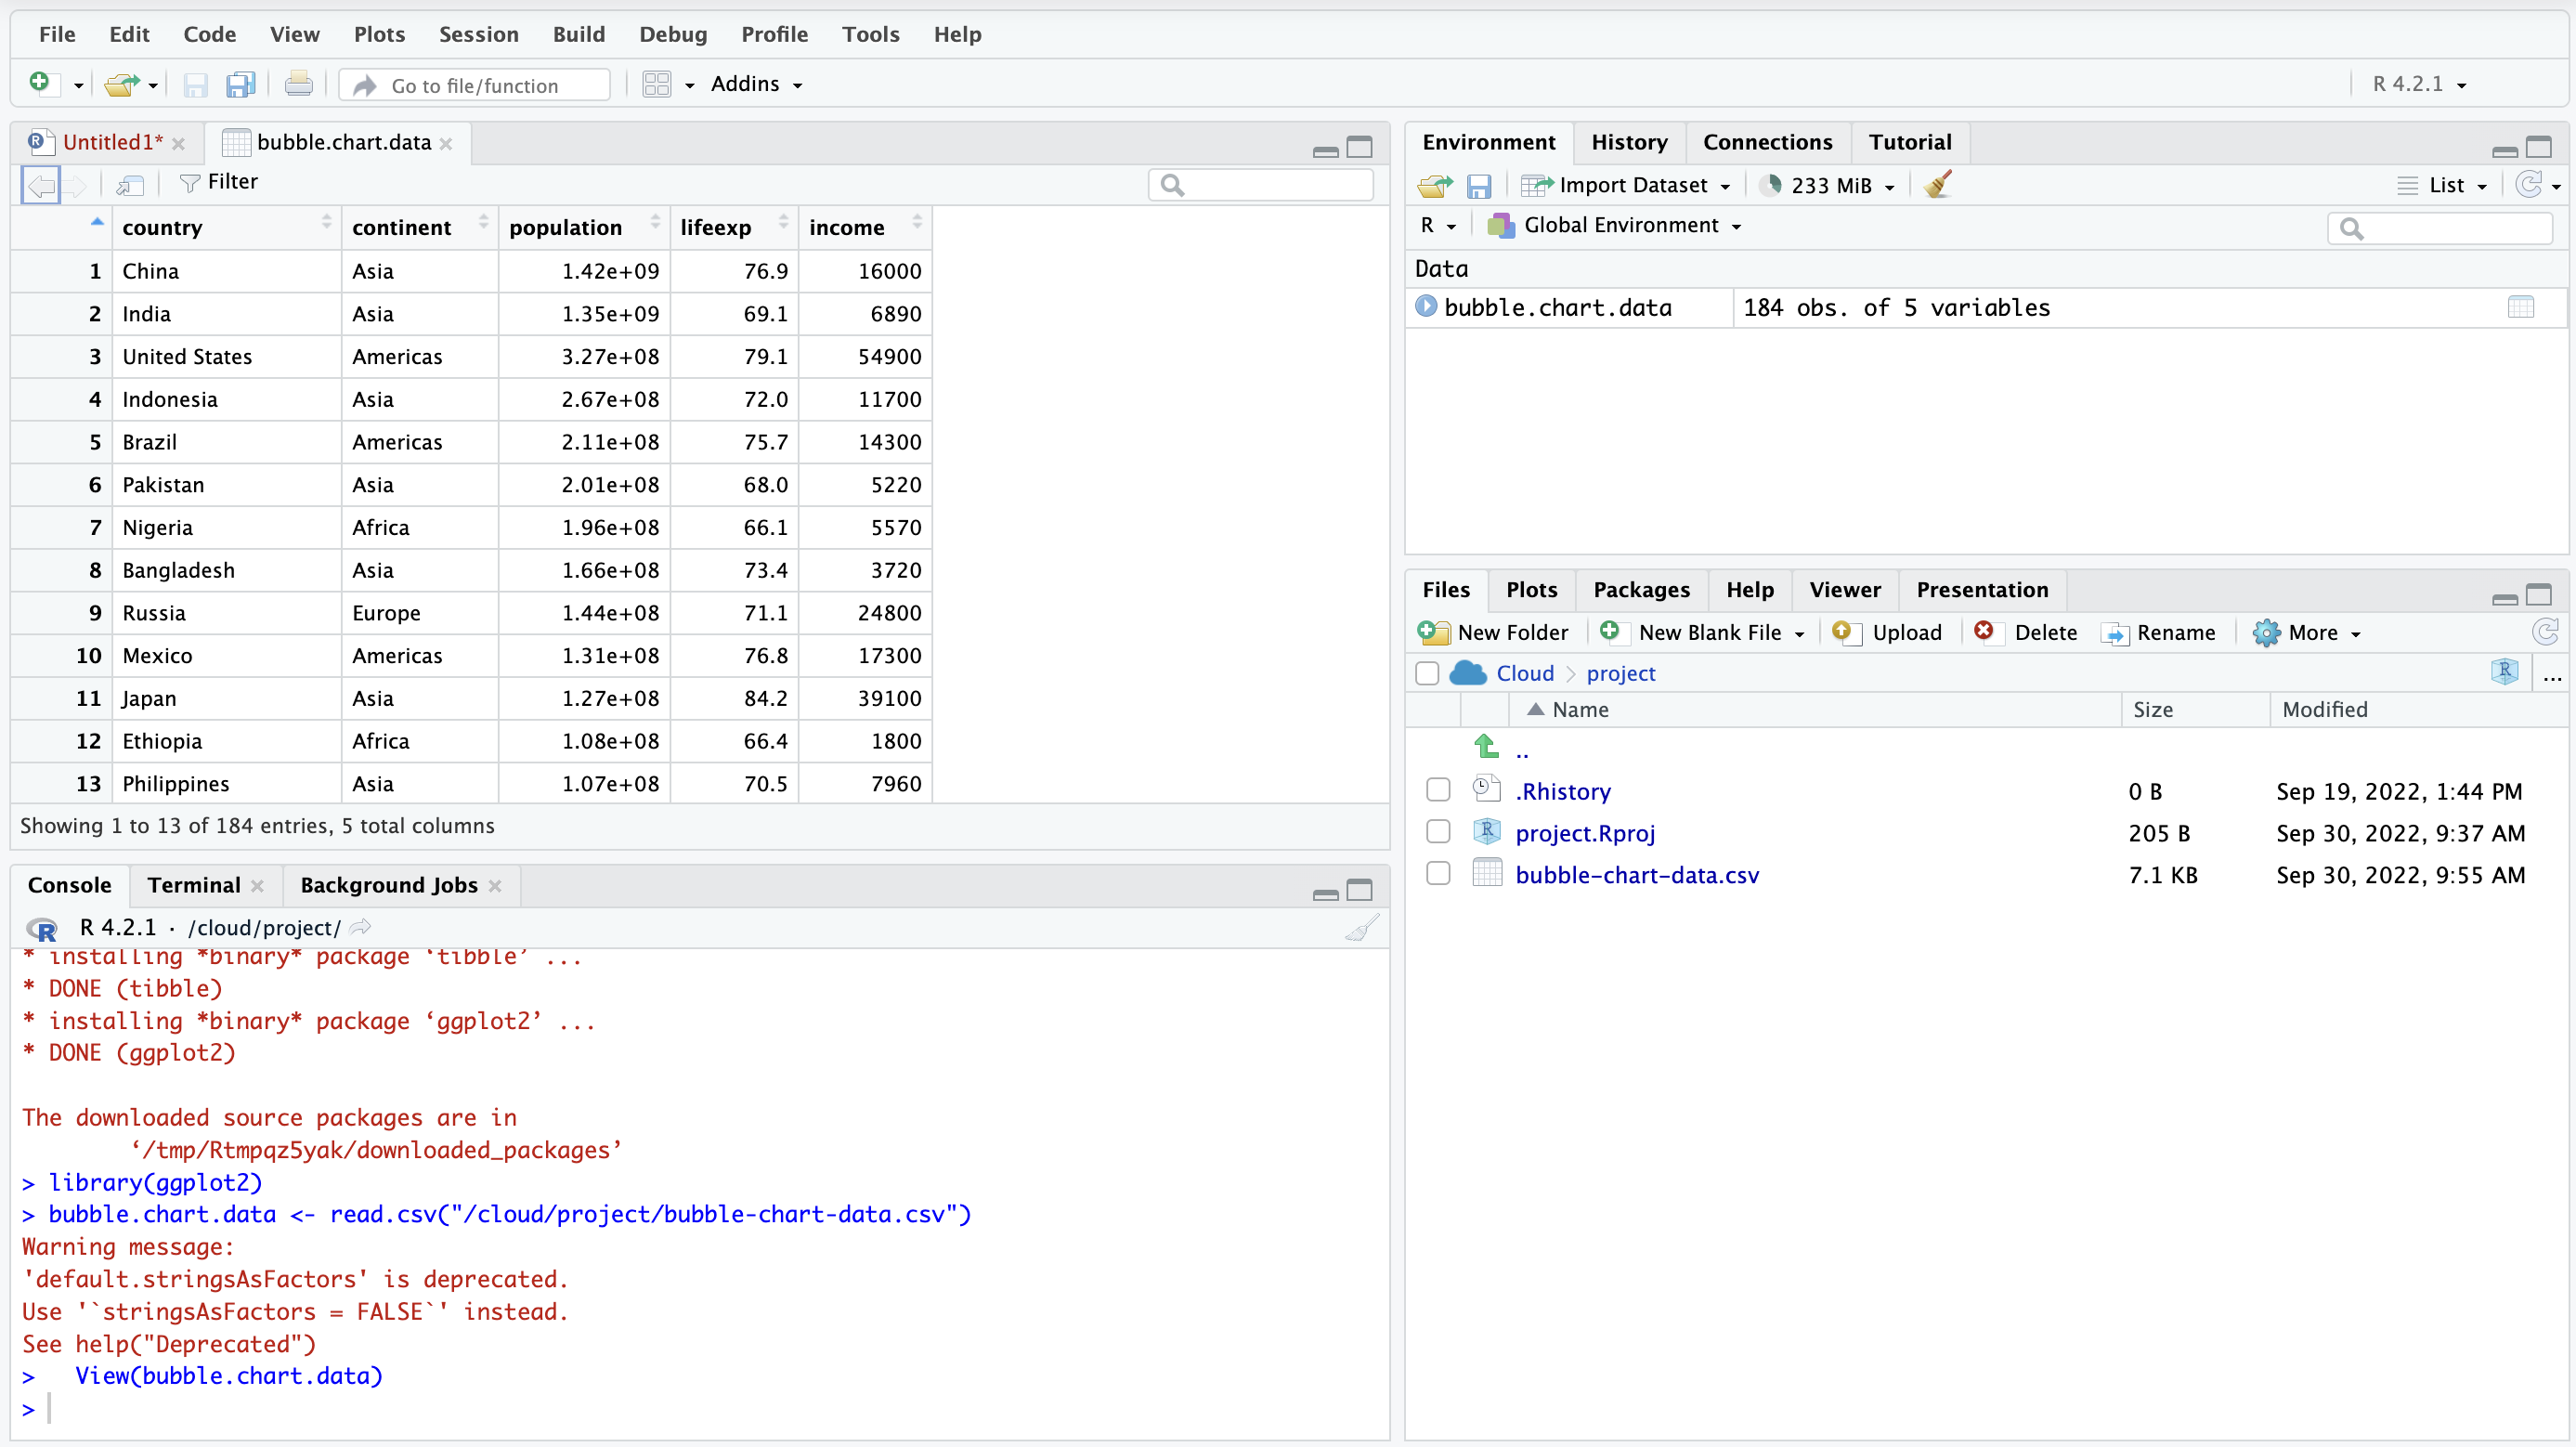 The RStudio interface, with the data of the csv file loaded